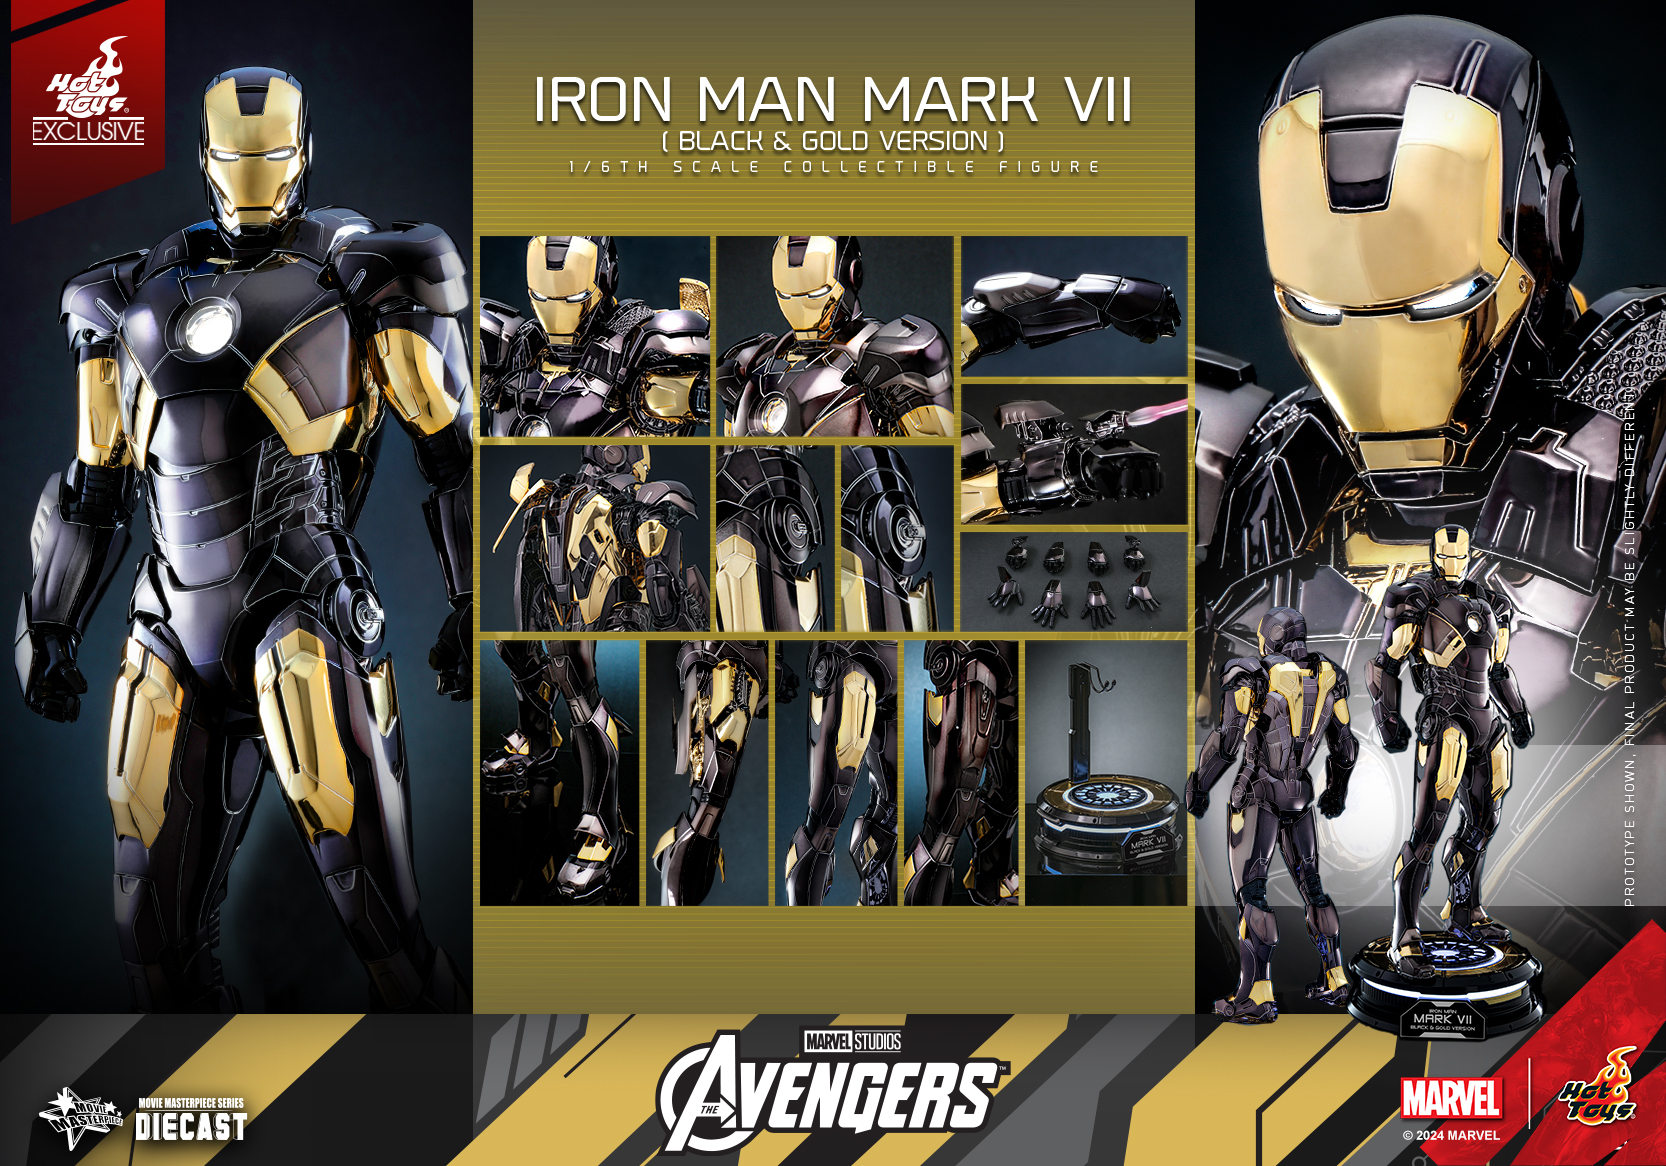 May be an illustration of toy and text that says 'HCto ร EXCLUSIVE IRON MAN MARK VII (BLACK& GOLD VERSION 1/5THSCALECOLECTIBLEFISUPE COLLECTIBLE FIGURE 1/5TH NEE BENASTIP EMATIPEESINE ECESINES រនម DIECAST VENGERS TUOIS MARVESTUORS MARVELS MARVEL 2024MARVEL Tayo'